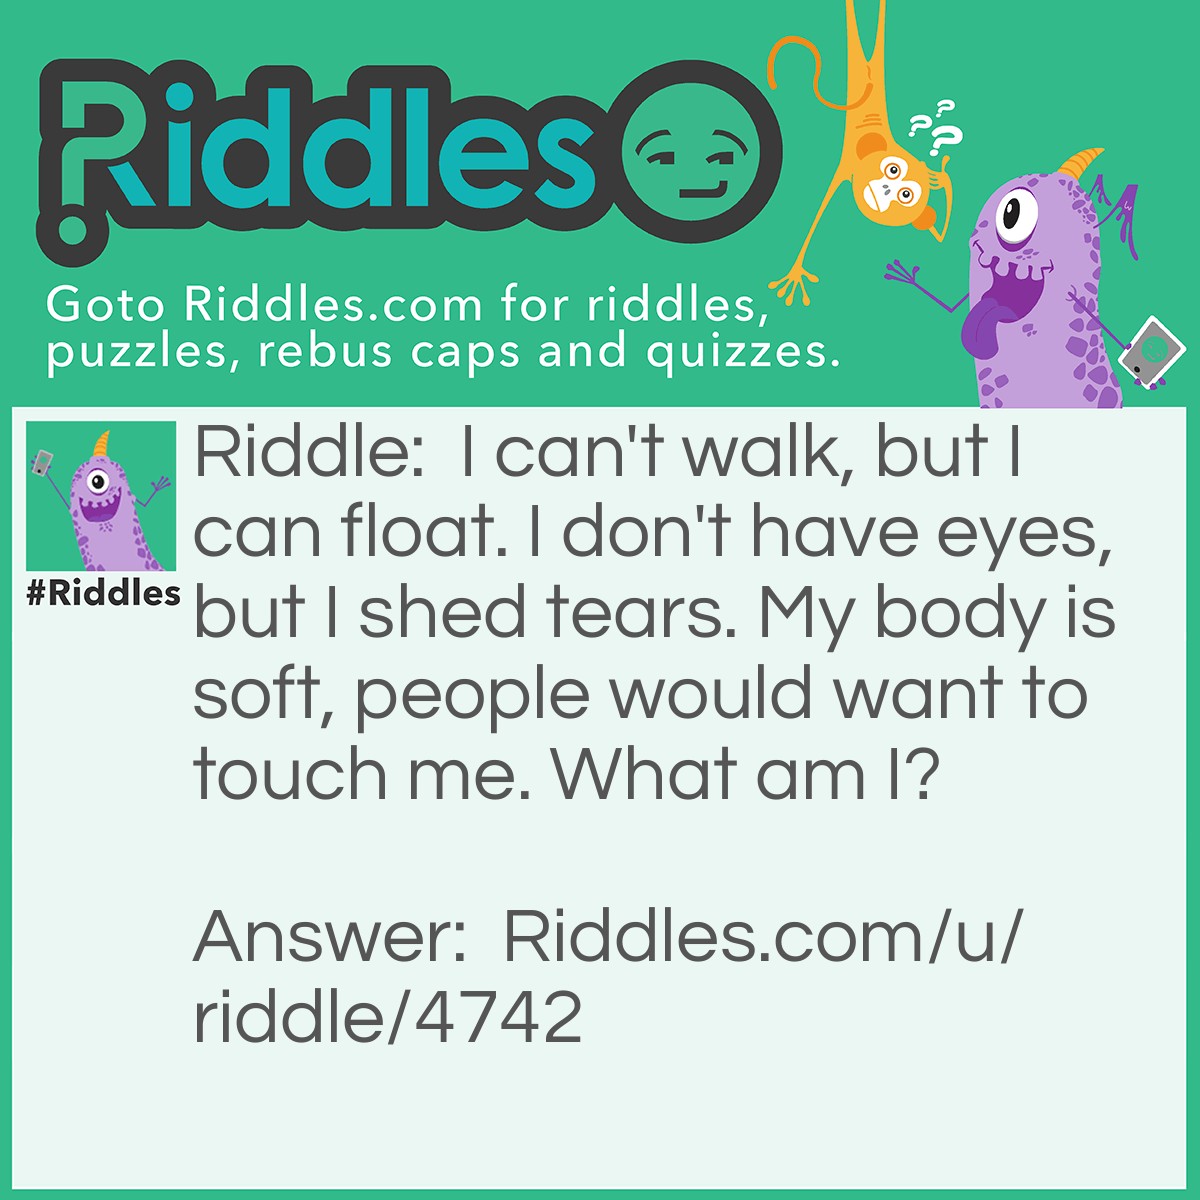 Riddle: I can't walk, but I can float. I don't have eyes, but I shed tears. My body is soft, people would want to touch me. What am I? Answer: A cloud.